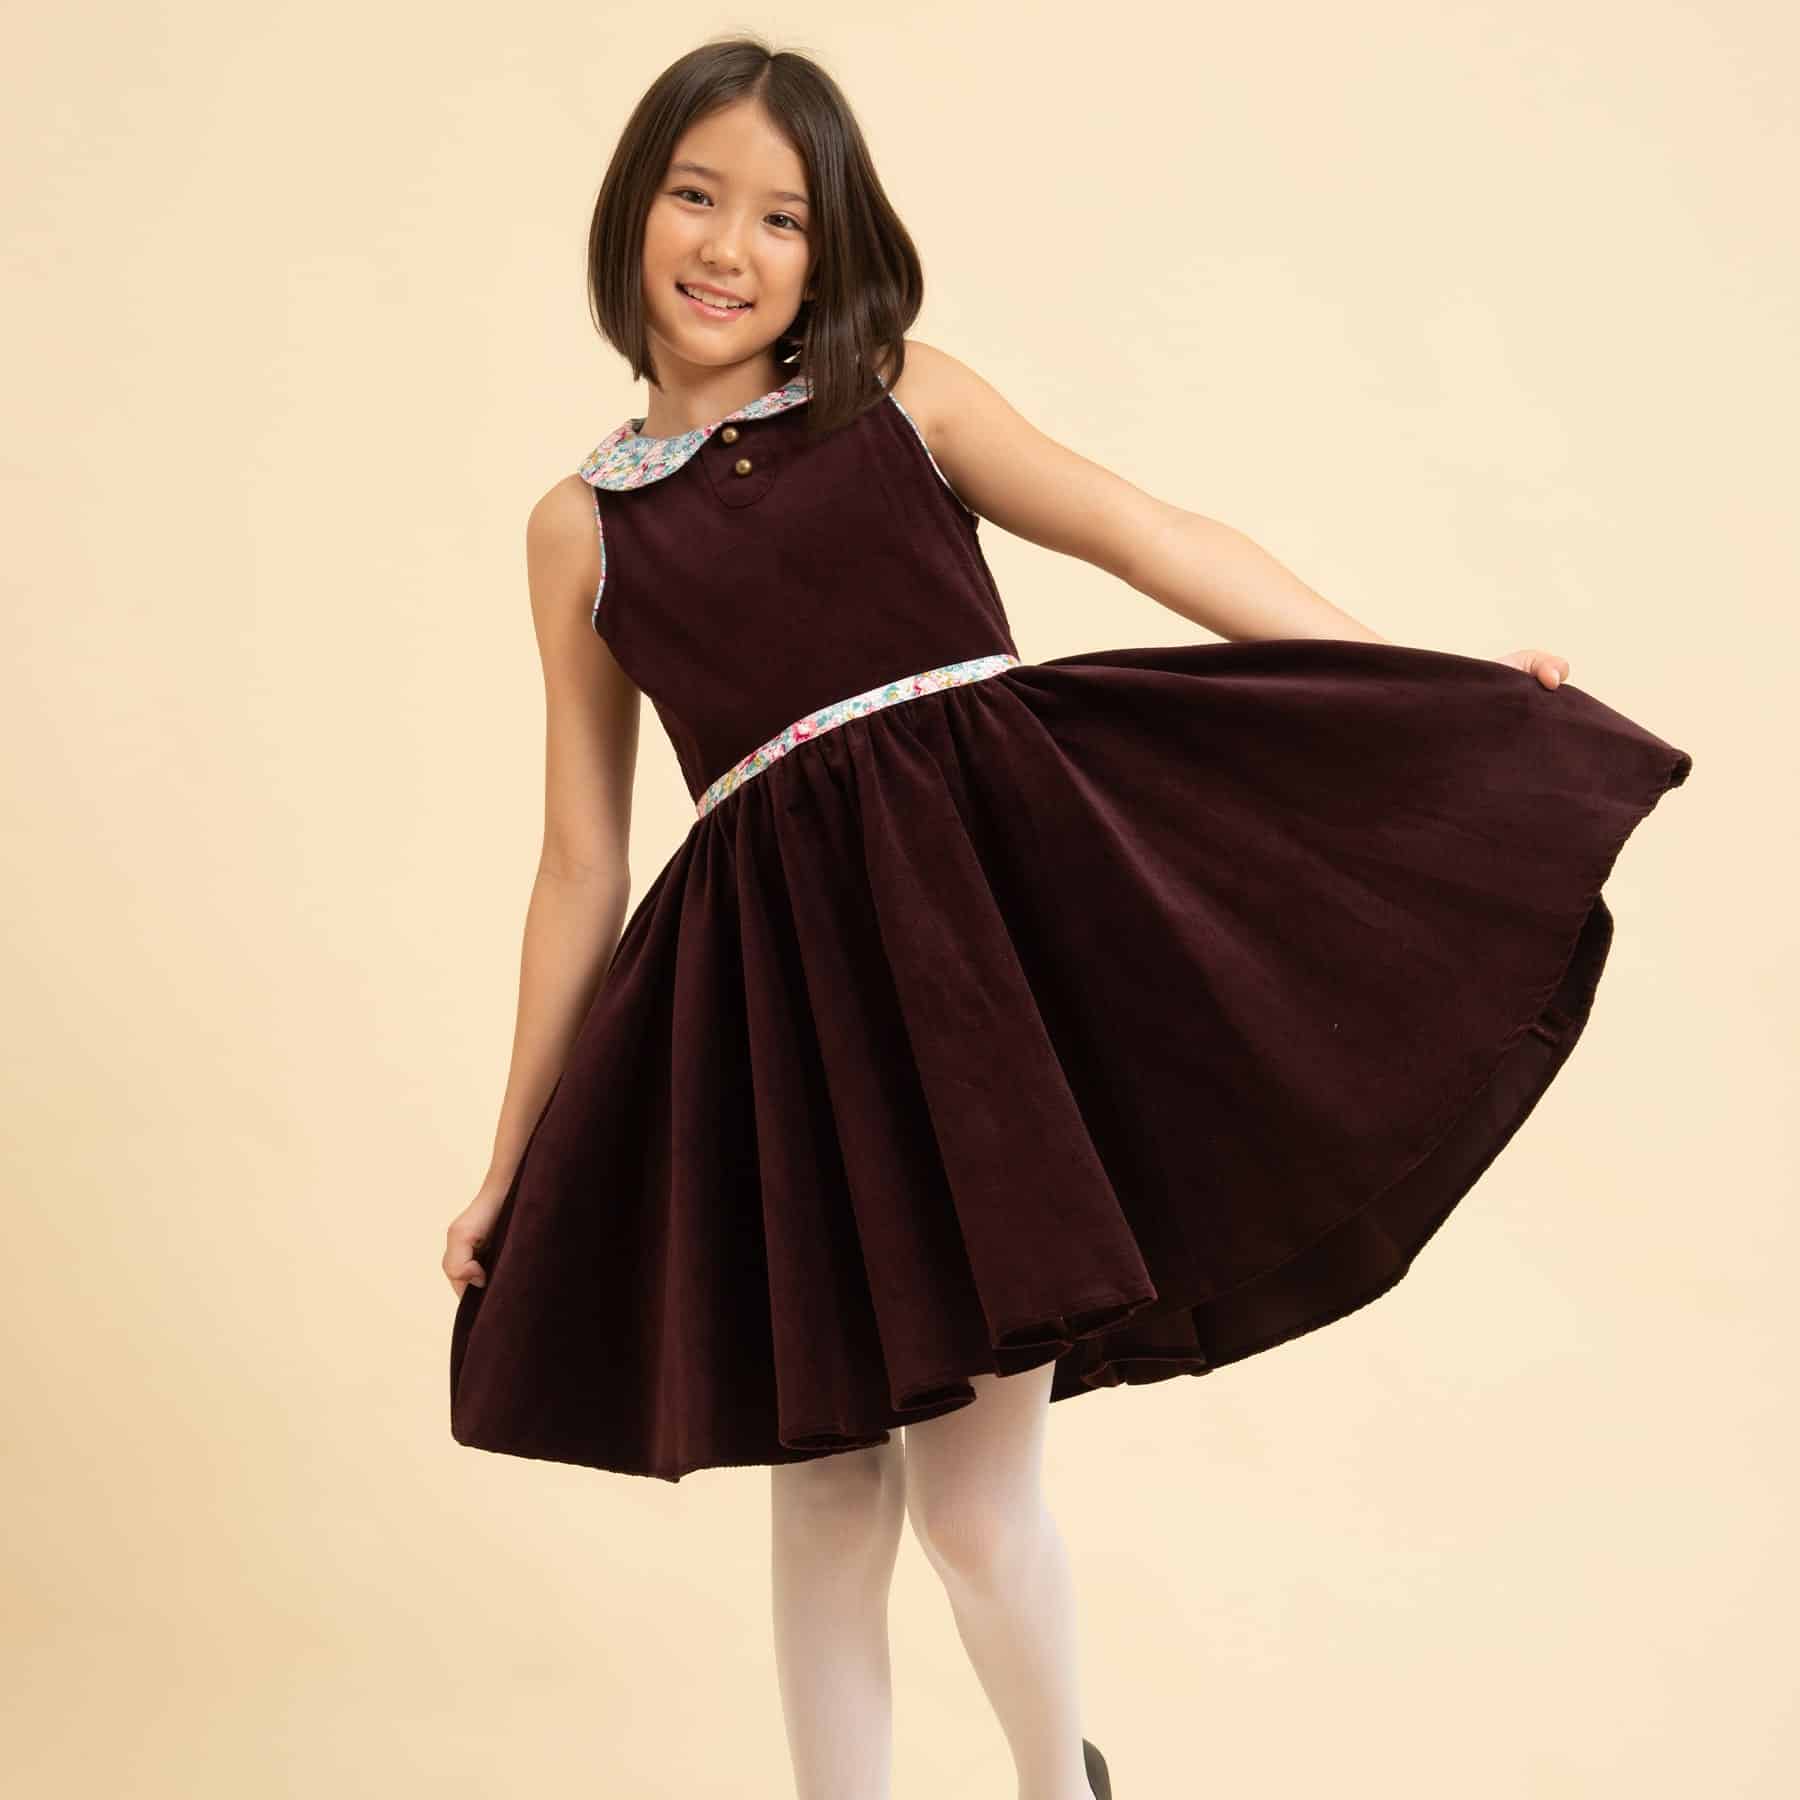 Pretty dress that turns for girls and girls. in eggplant velvet with pale pink flowered Claudine collar from the children's fashion brand la faute à voltaire